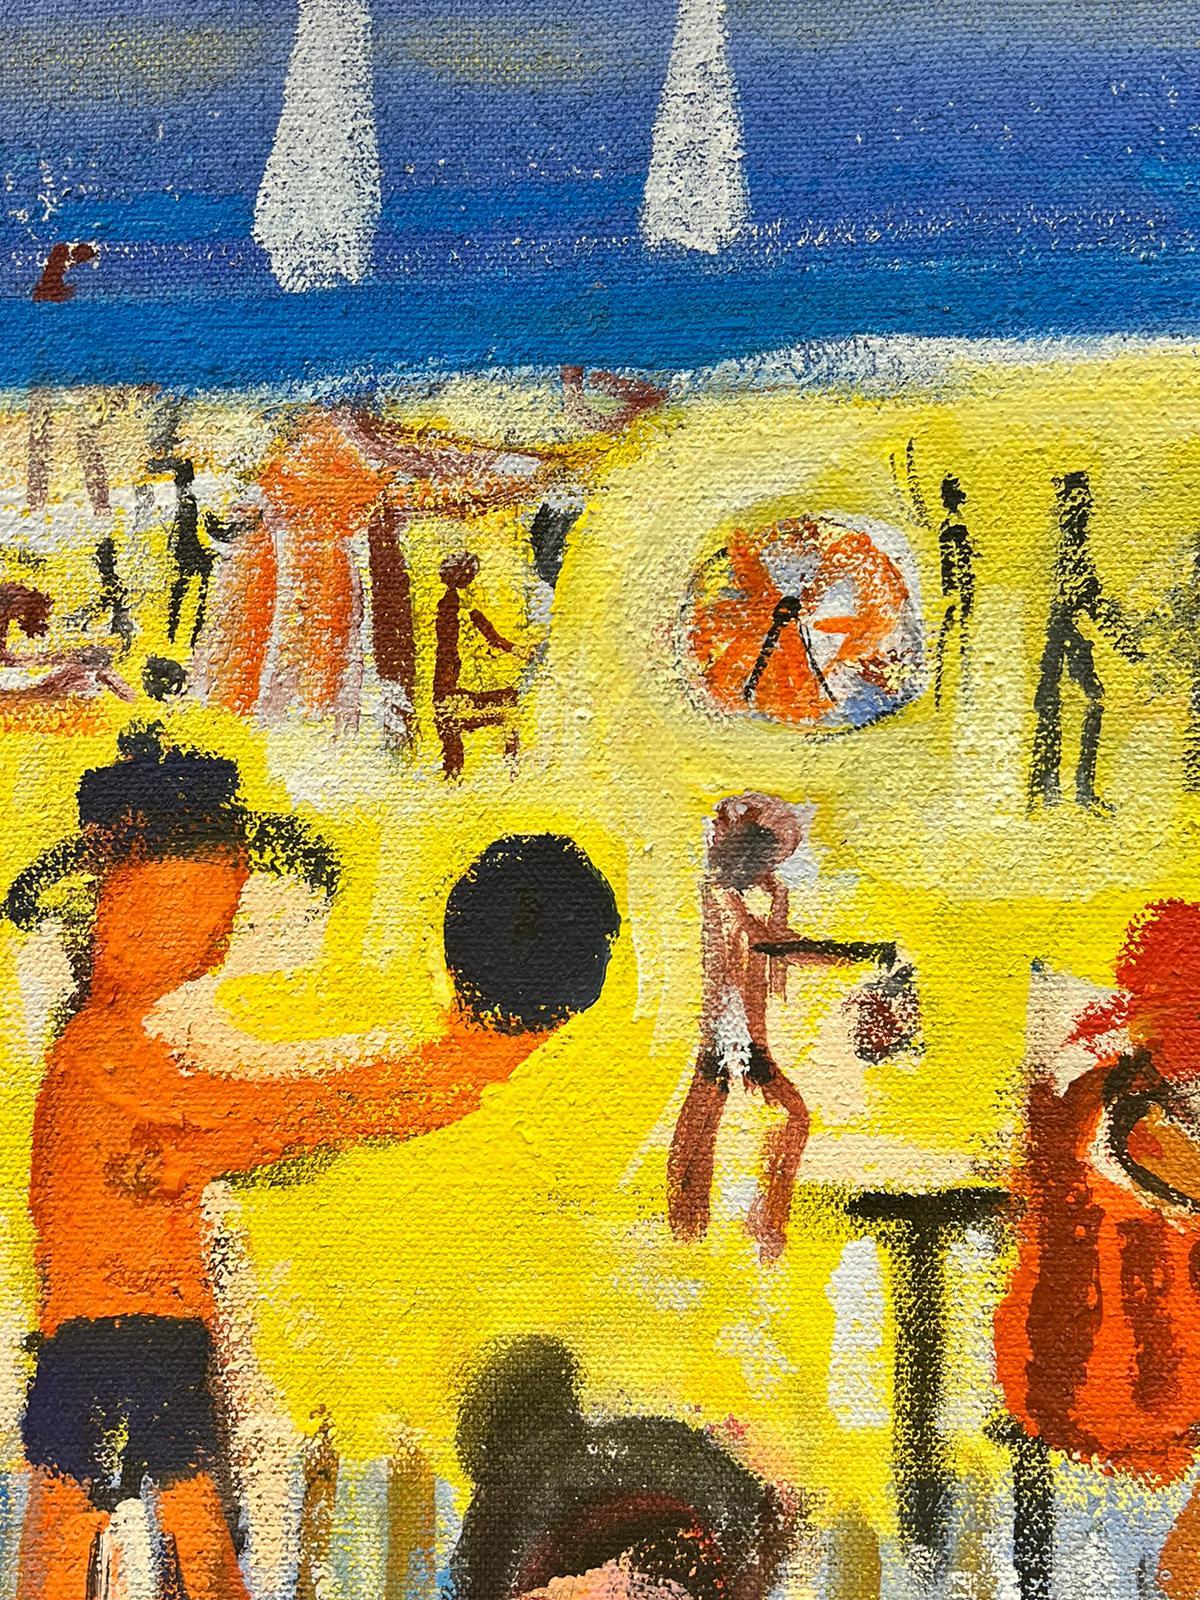 Beach Games
Huguette Ginet-Lasnier (French 1927-2020)
oil painting on textured canvas
29 x 24 inches.
All the paintings we have for sale by this artist have come from the artists estate in France.
The painting is in very good and presentable